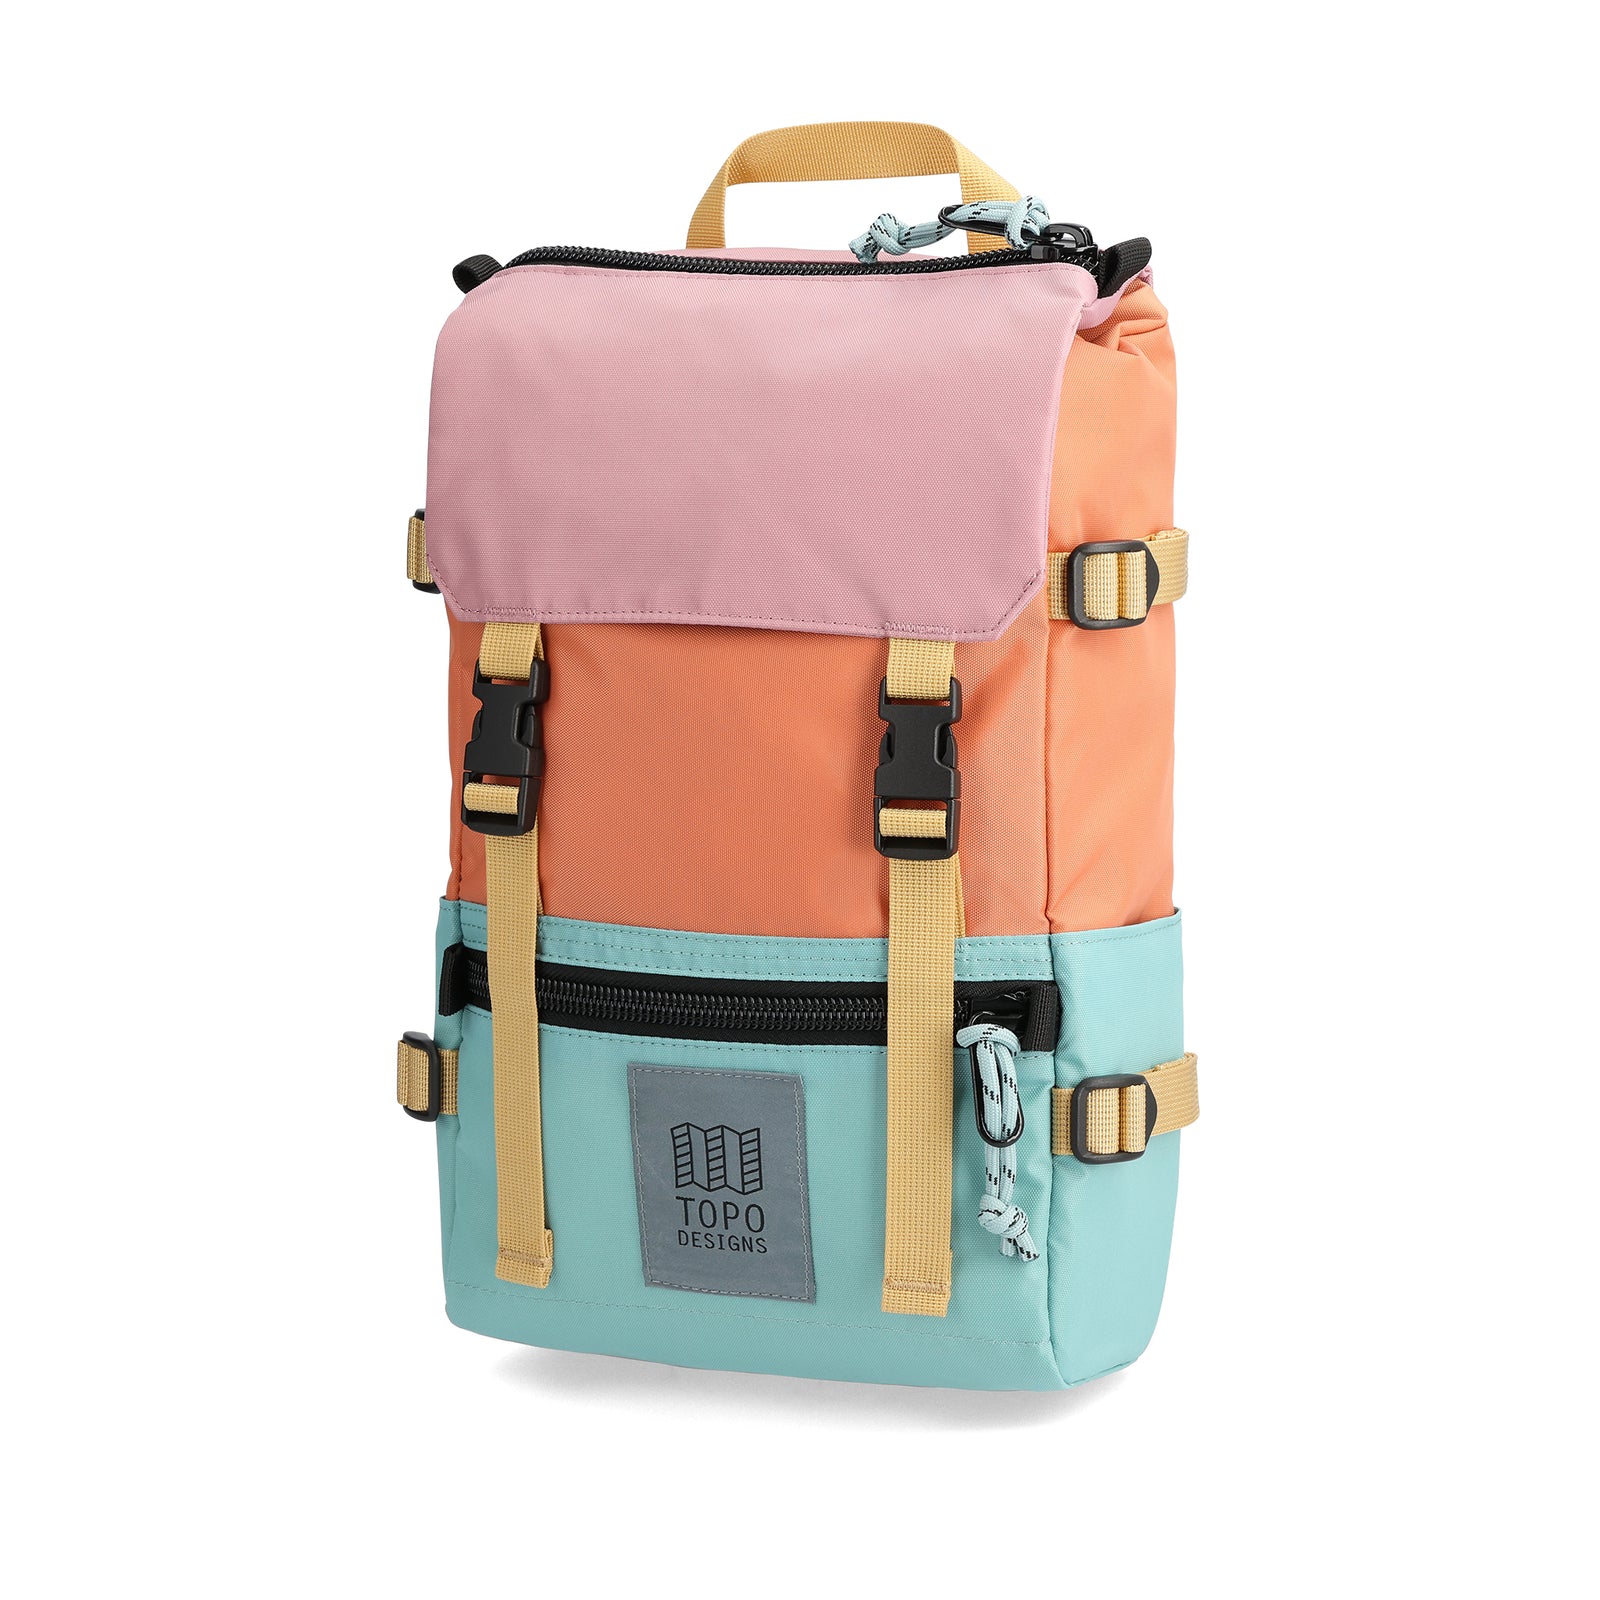 Front View of Topo Designs Rover Pack Mini in "Rose / Geode Green"